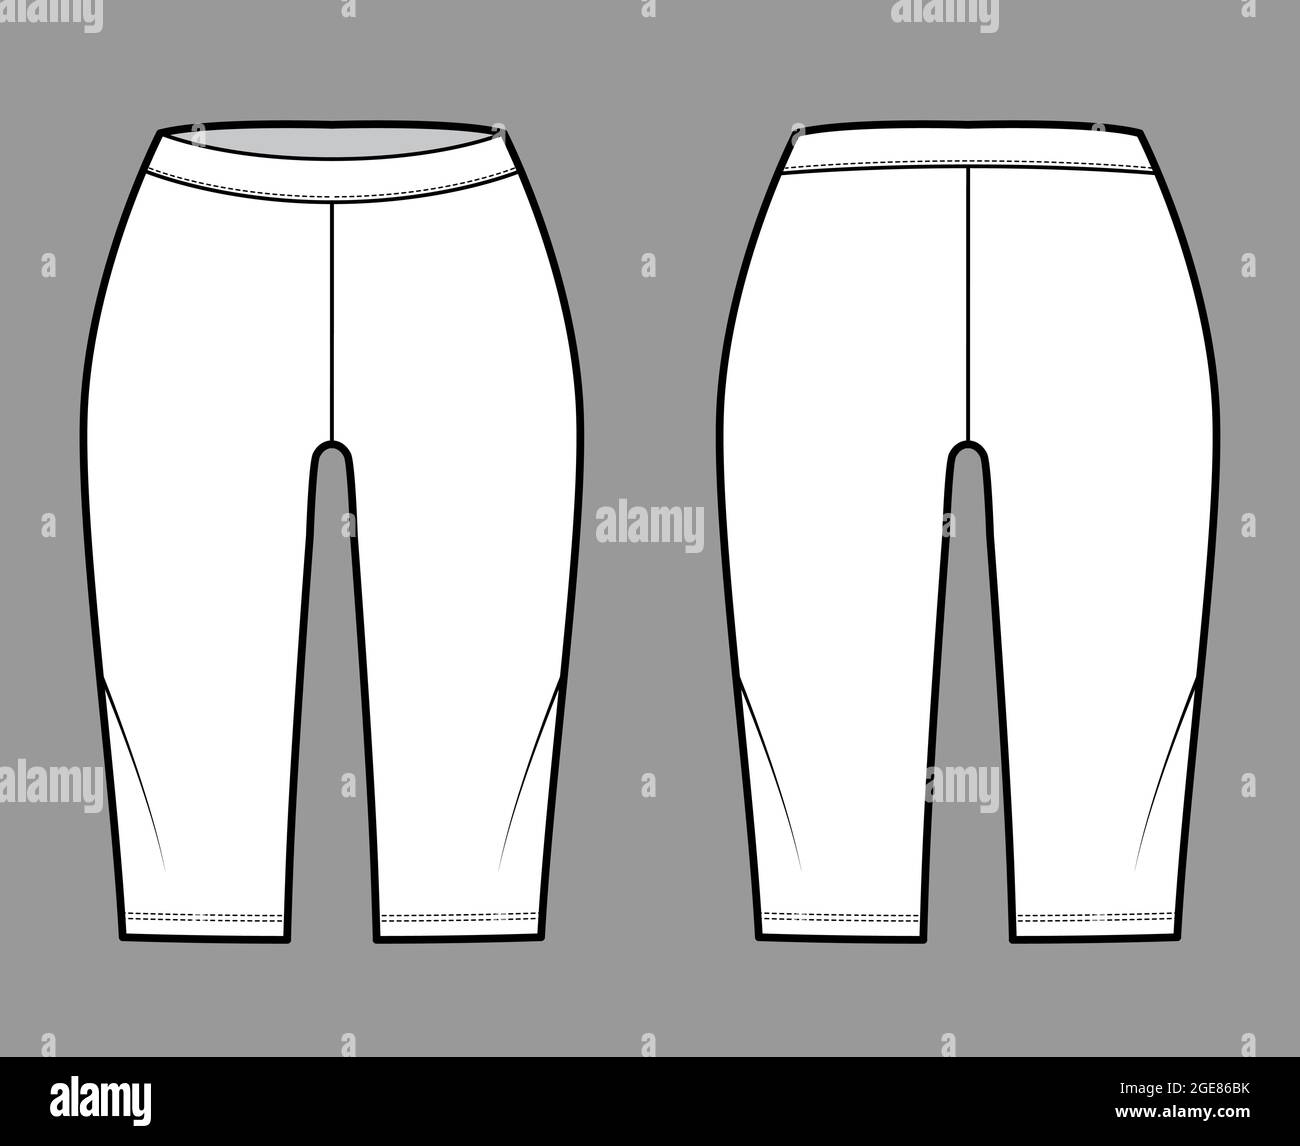 Bike shorts Leggings technical fashion illustration with low waist, rise, knee length. Flat sport pants, casual knit trousers apparel template front, back, white color. Women, men unisex CAD mockup Stock Vector